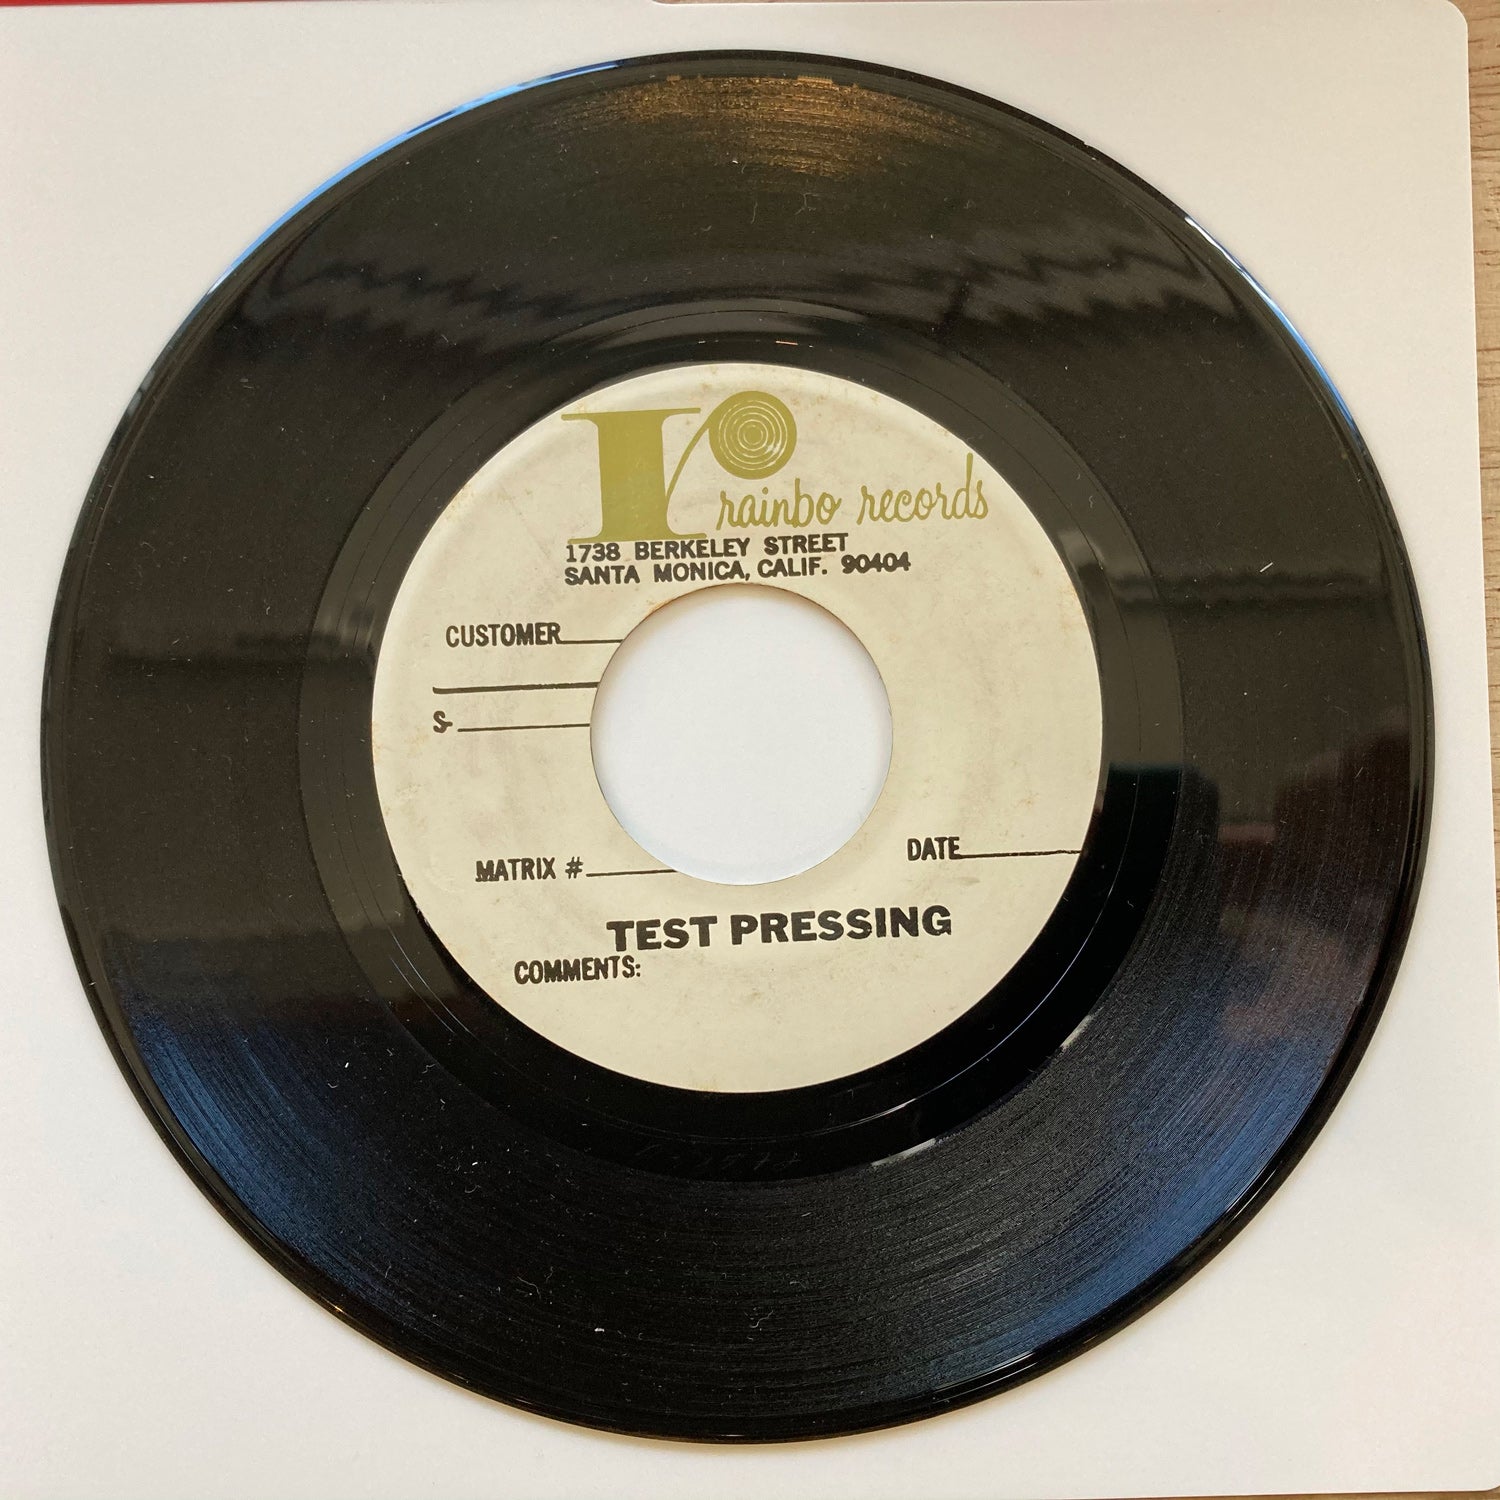 Wiz Kidz - Down On My Luck / What's This Feeling [Test Pressing, 7"]